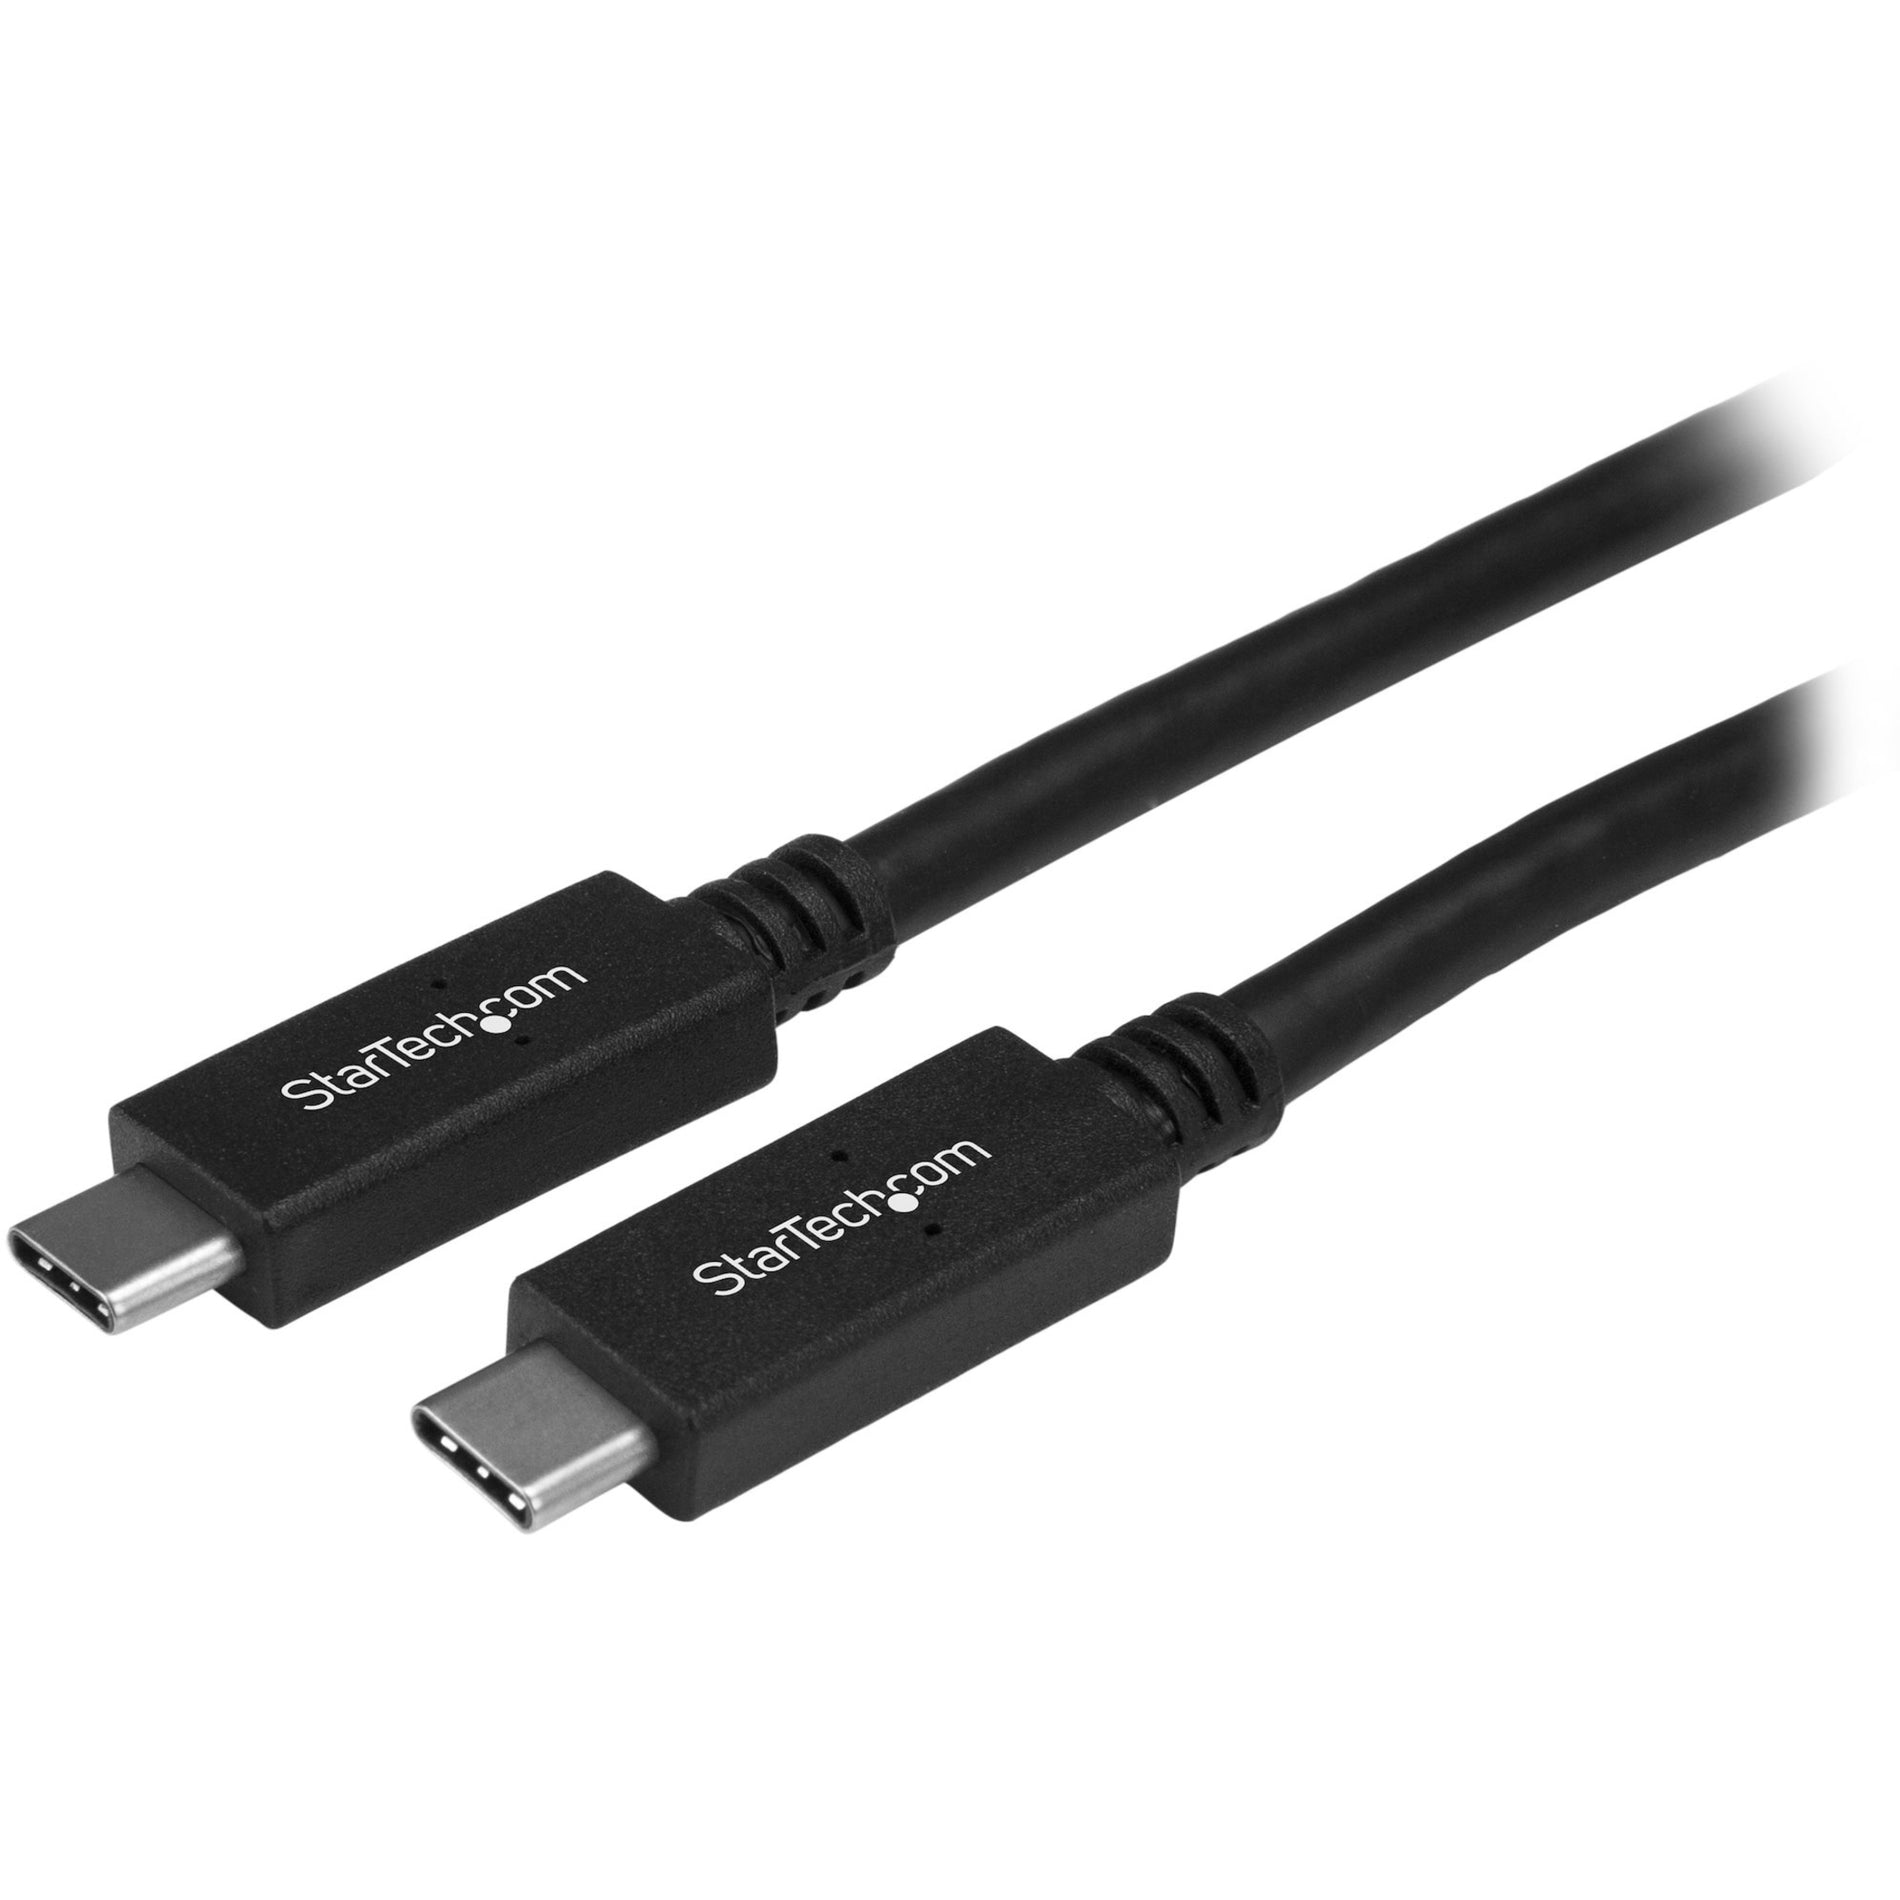 StarTech.com USB315CC1M USB-C to USB-C Cable - M/M - 1m (3 ft.), USB 3.0 (5Gbps), USB C Charging Cable